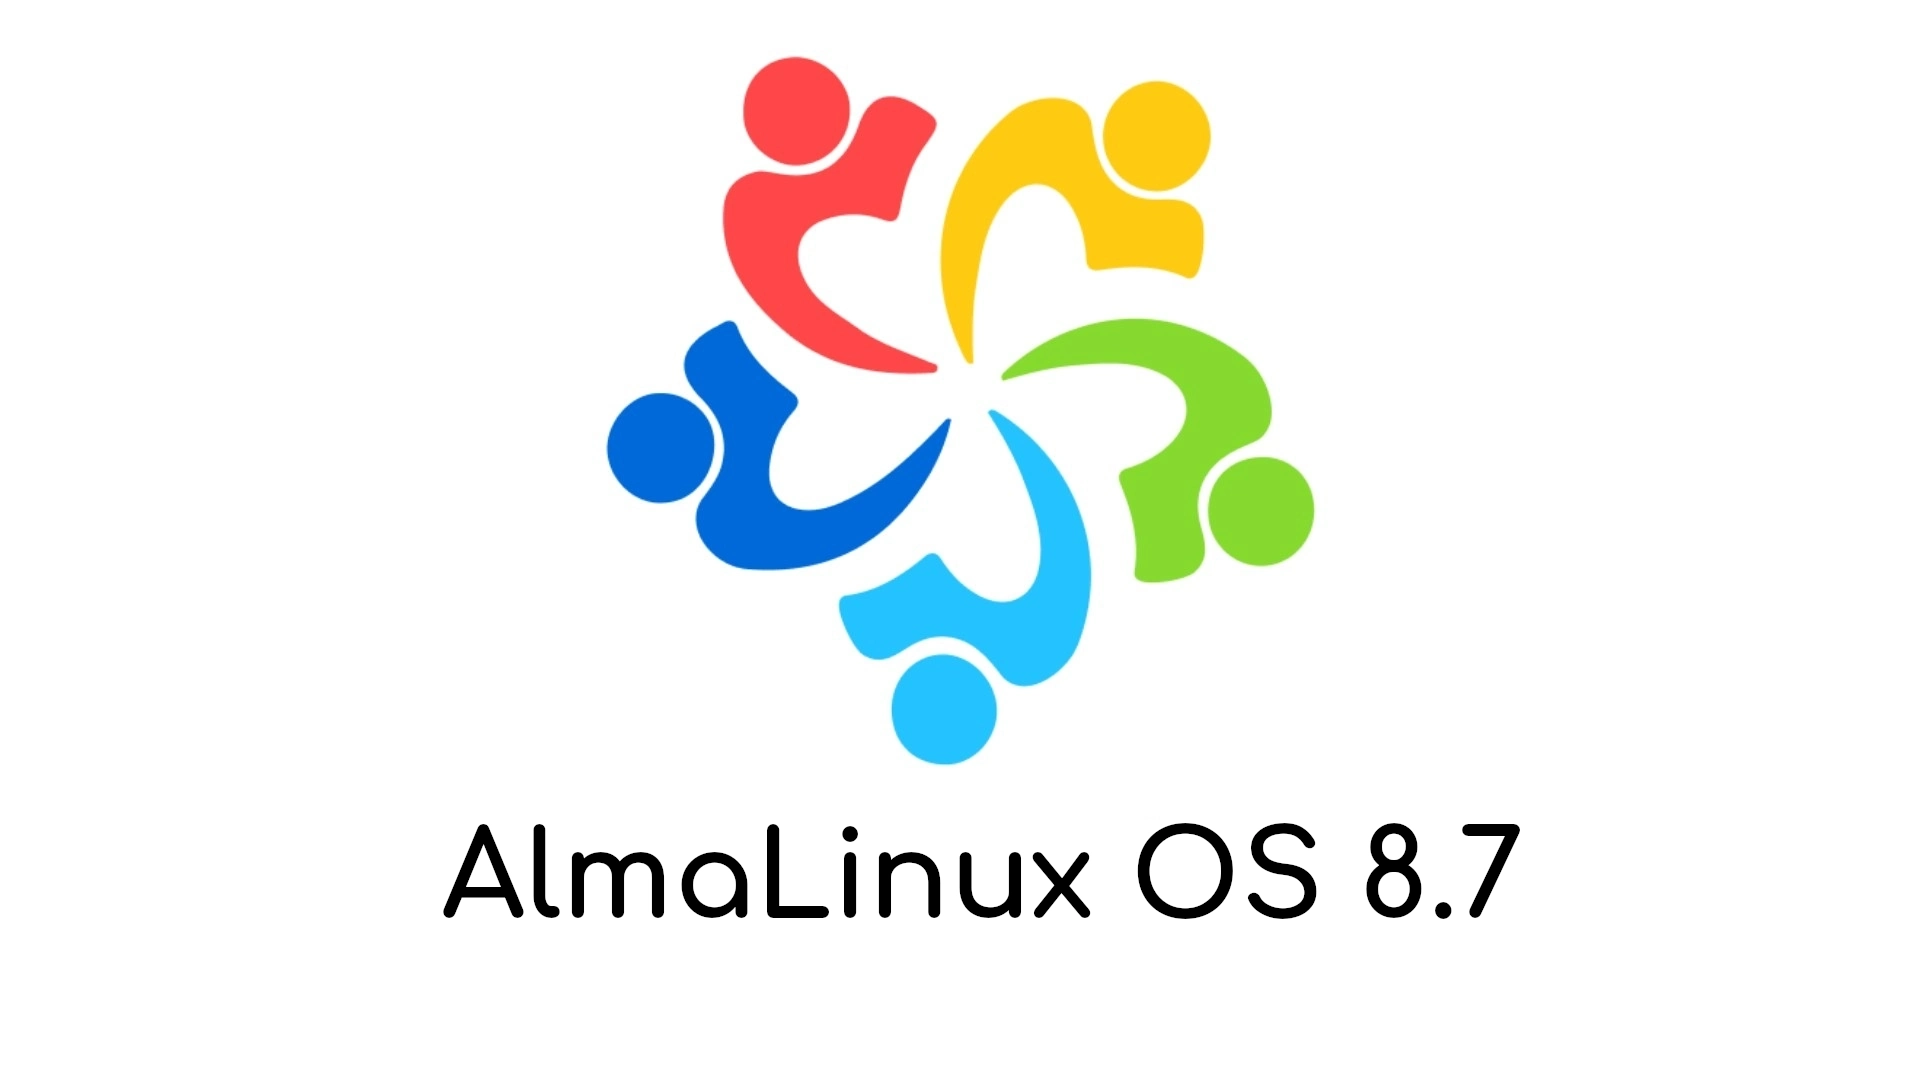 CentOS Alternative AlmaLinux 8.7 Is Out with Security Improvements, New Packages